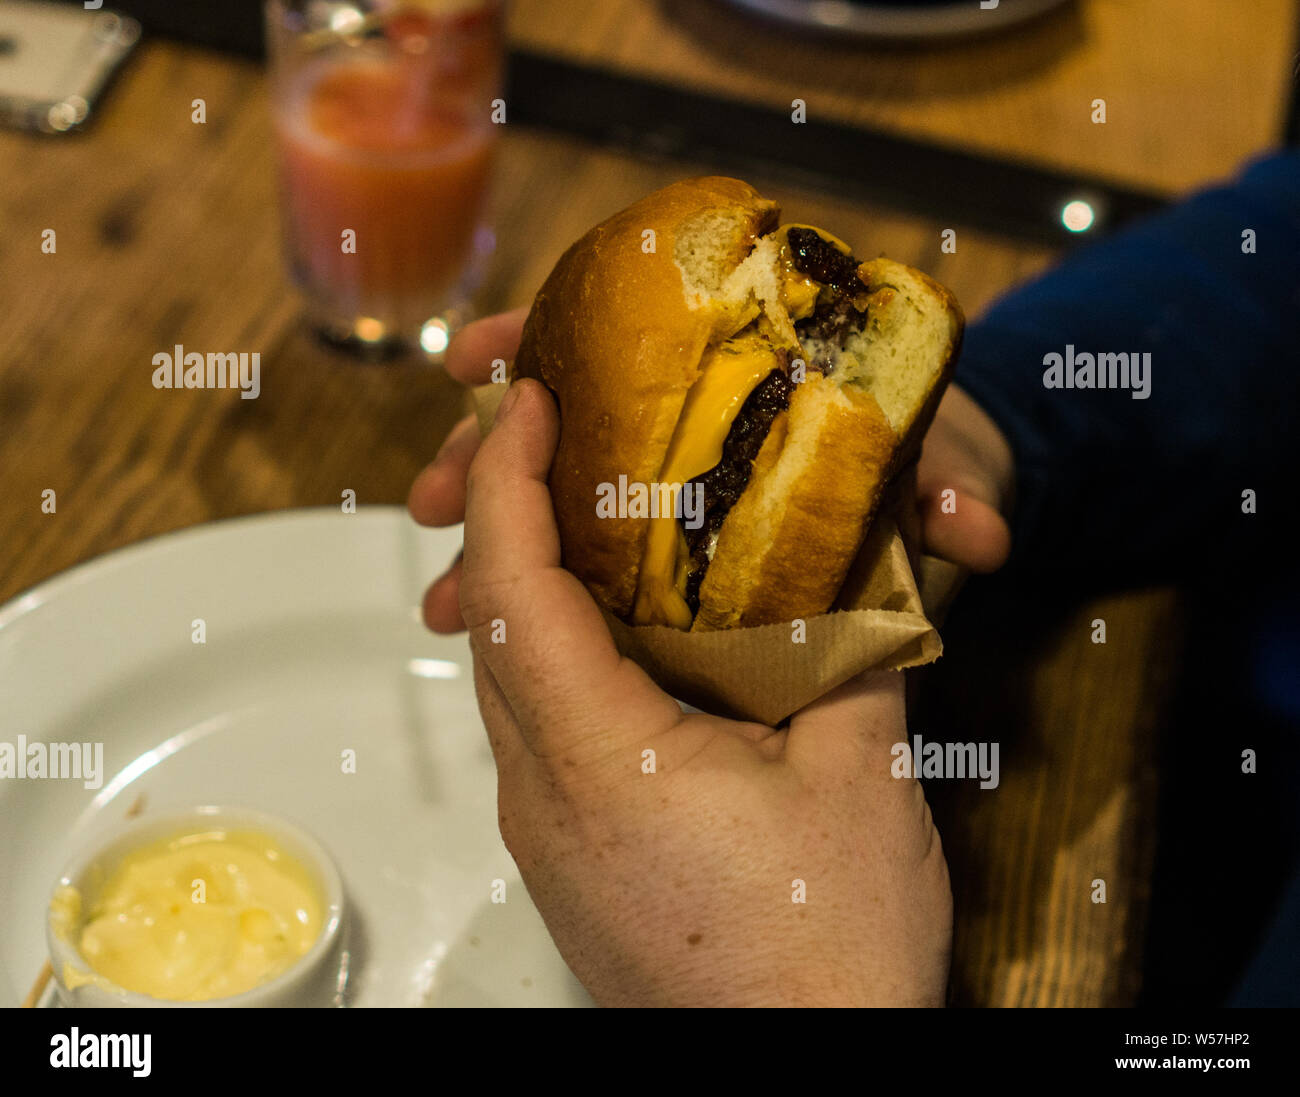 Young man's hands are holding a bitten hamburger in a fast food restaurant. Stock Photo